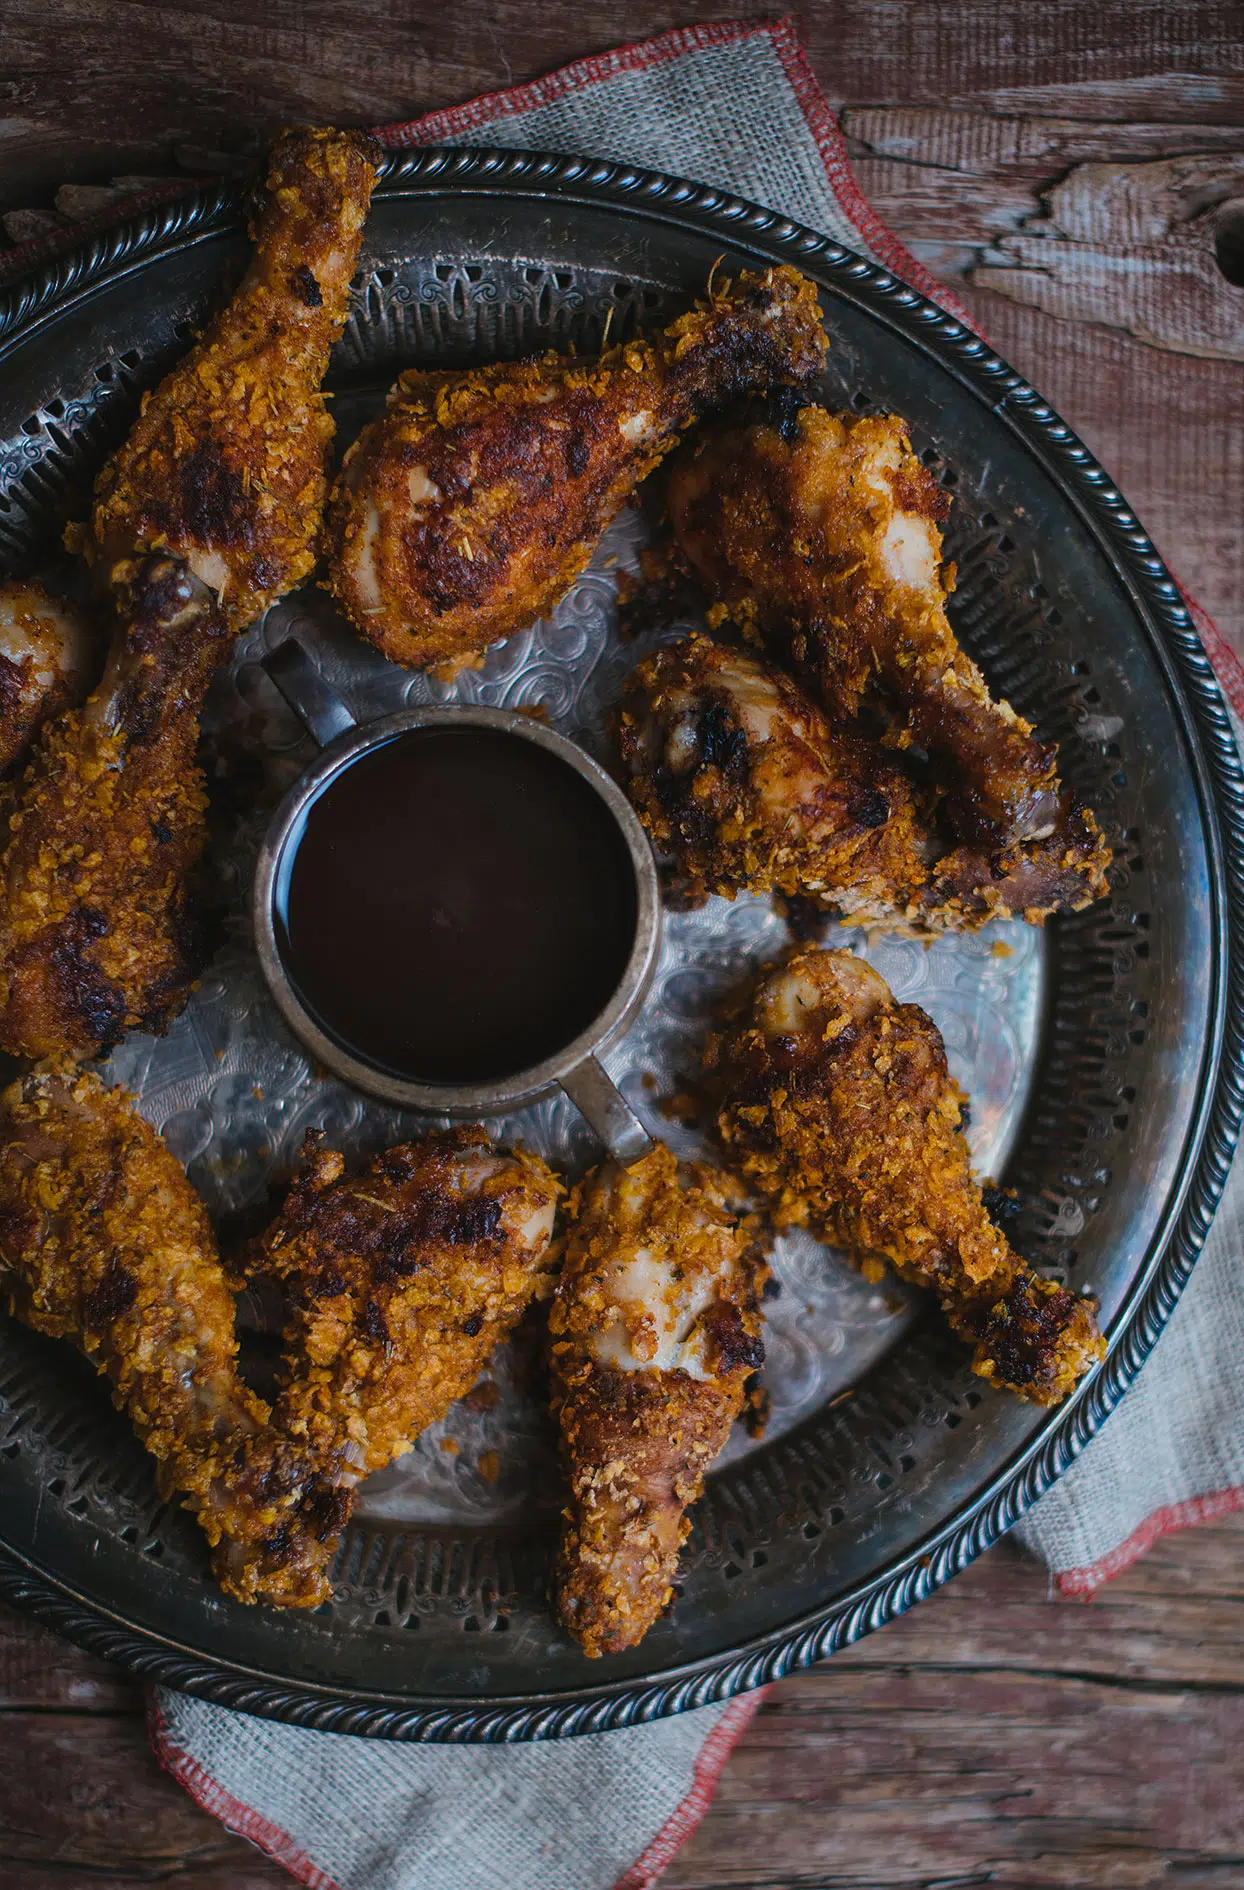 Oven crispy chicken drumsticks with sweet and sour sauce